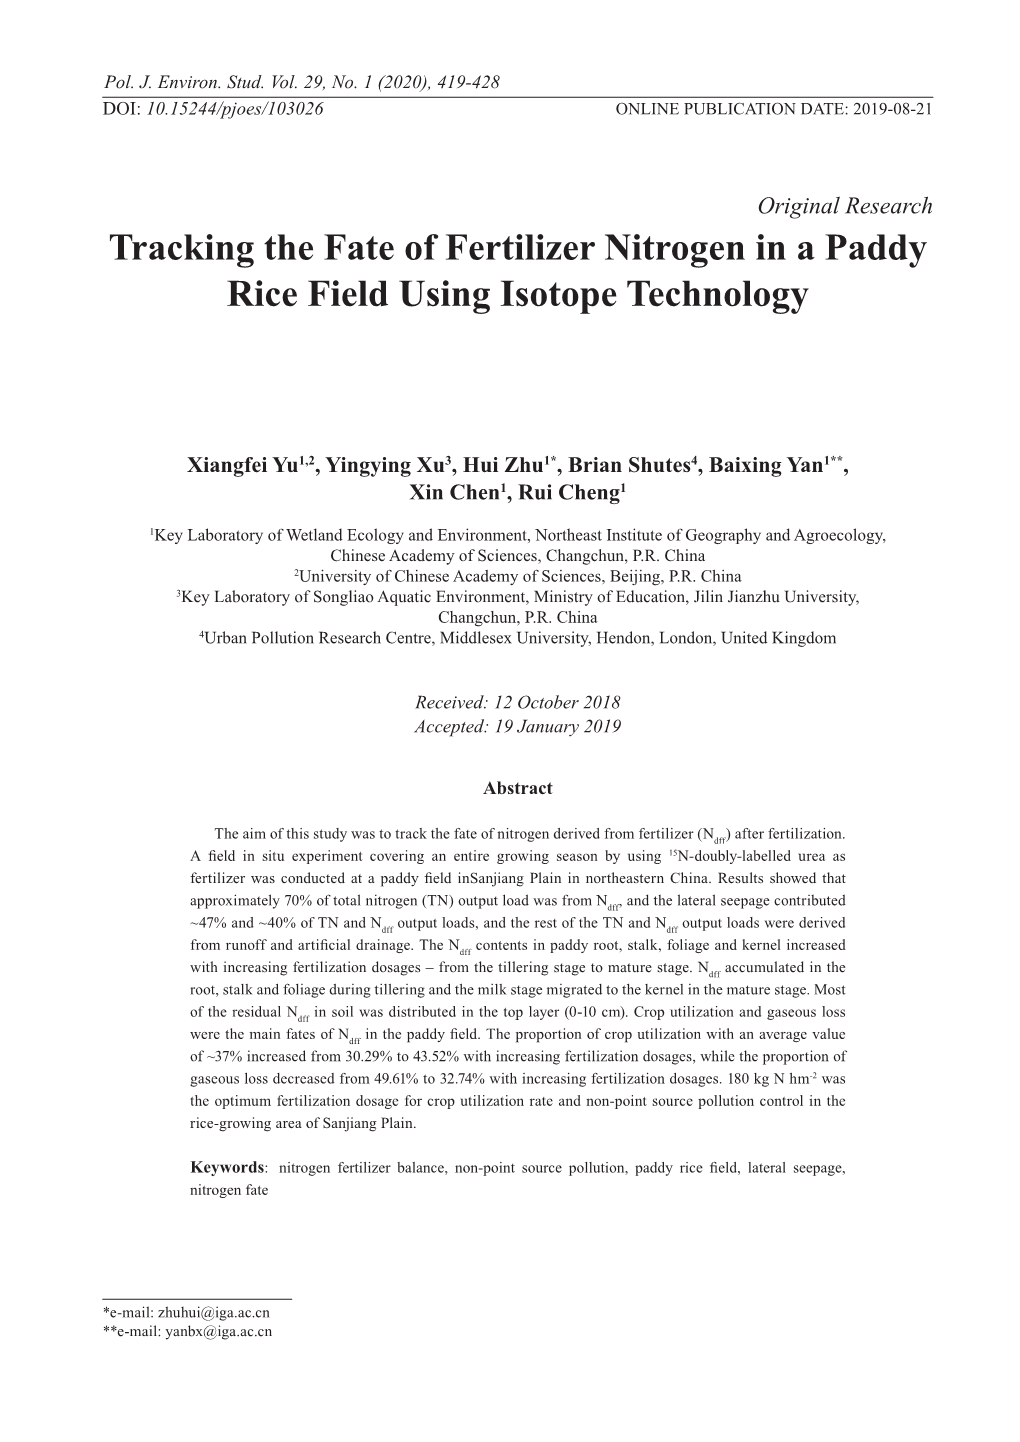 Tracking the Fate of Fertilizer Nitrogen in a Paddy Rice Field Using Isotope Technology